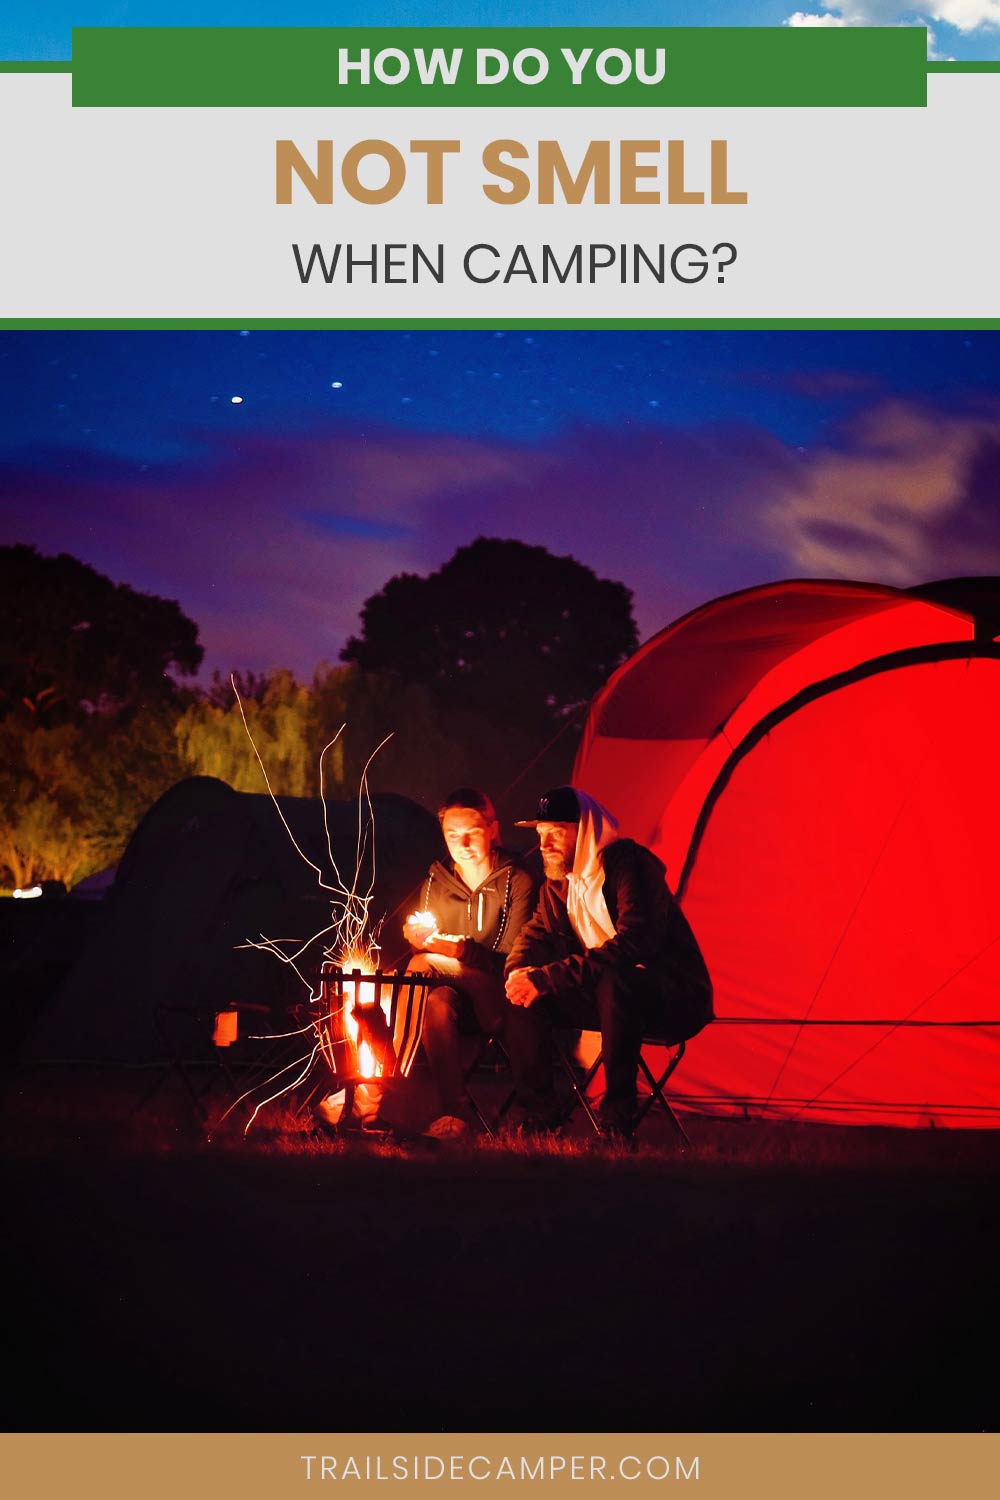 How Do You Not Smell When Camping?